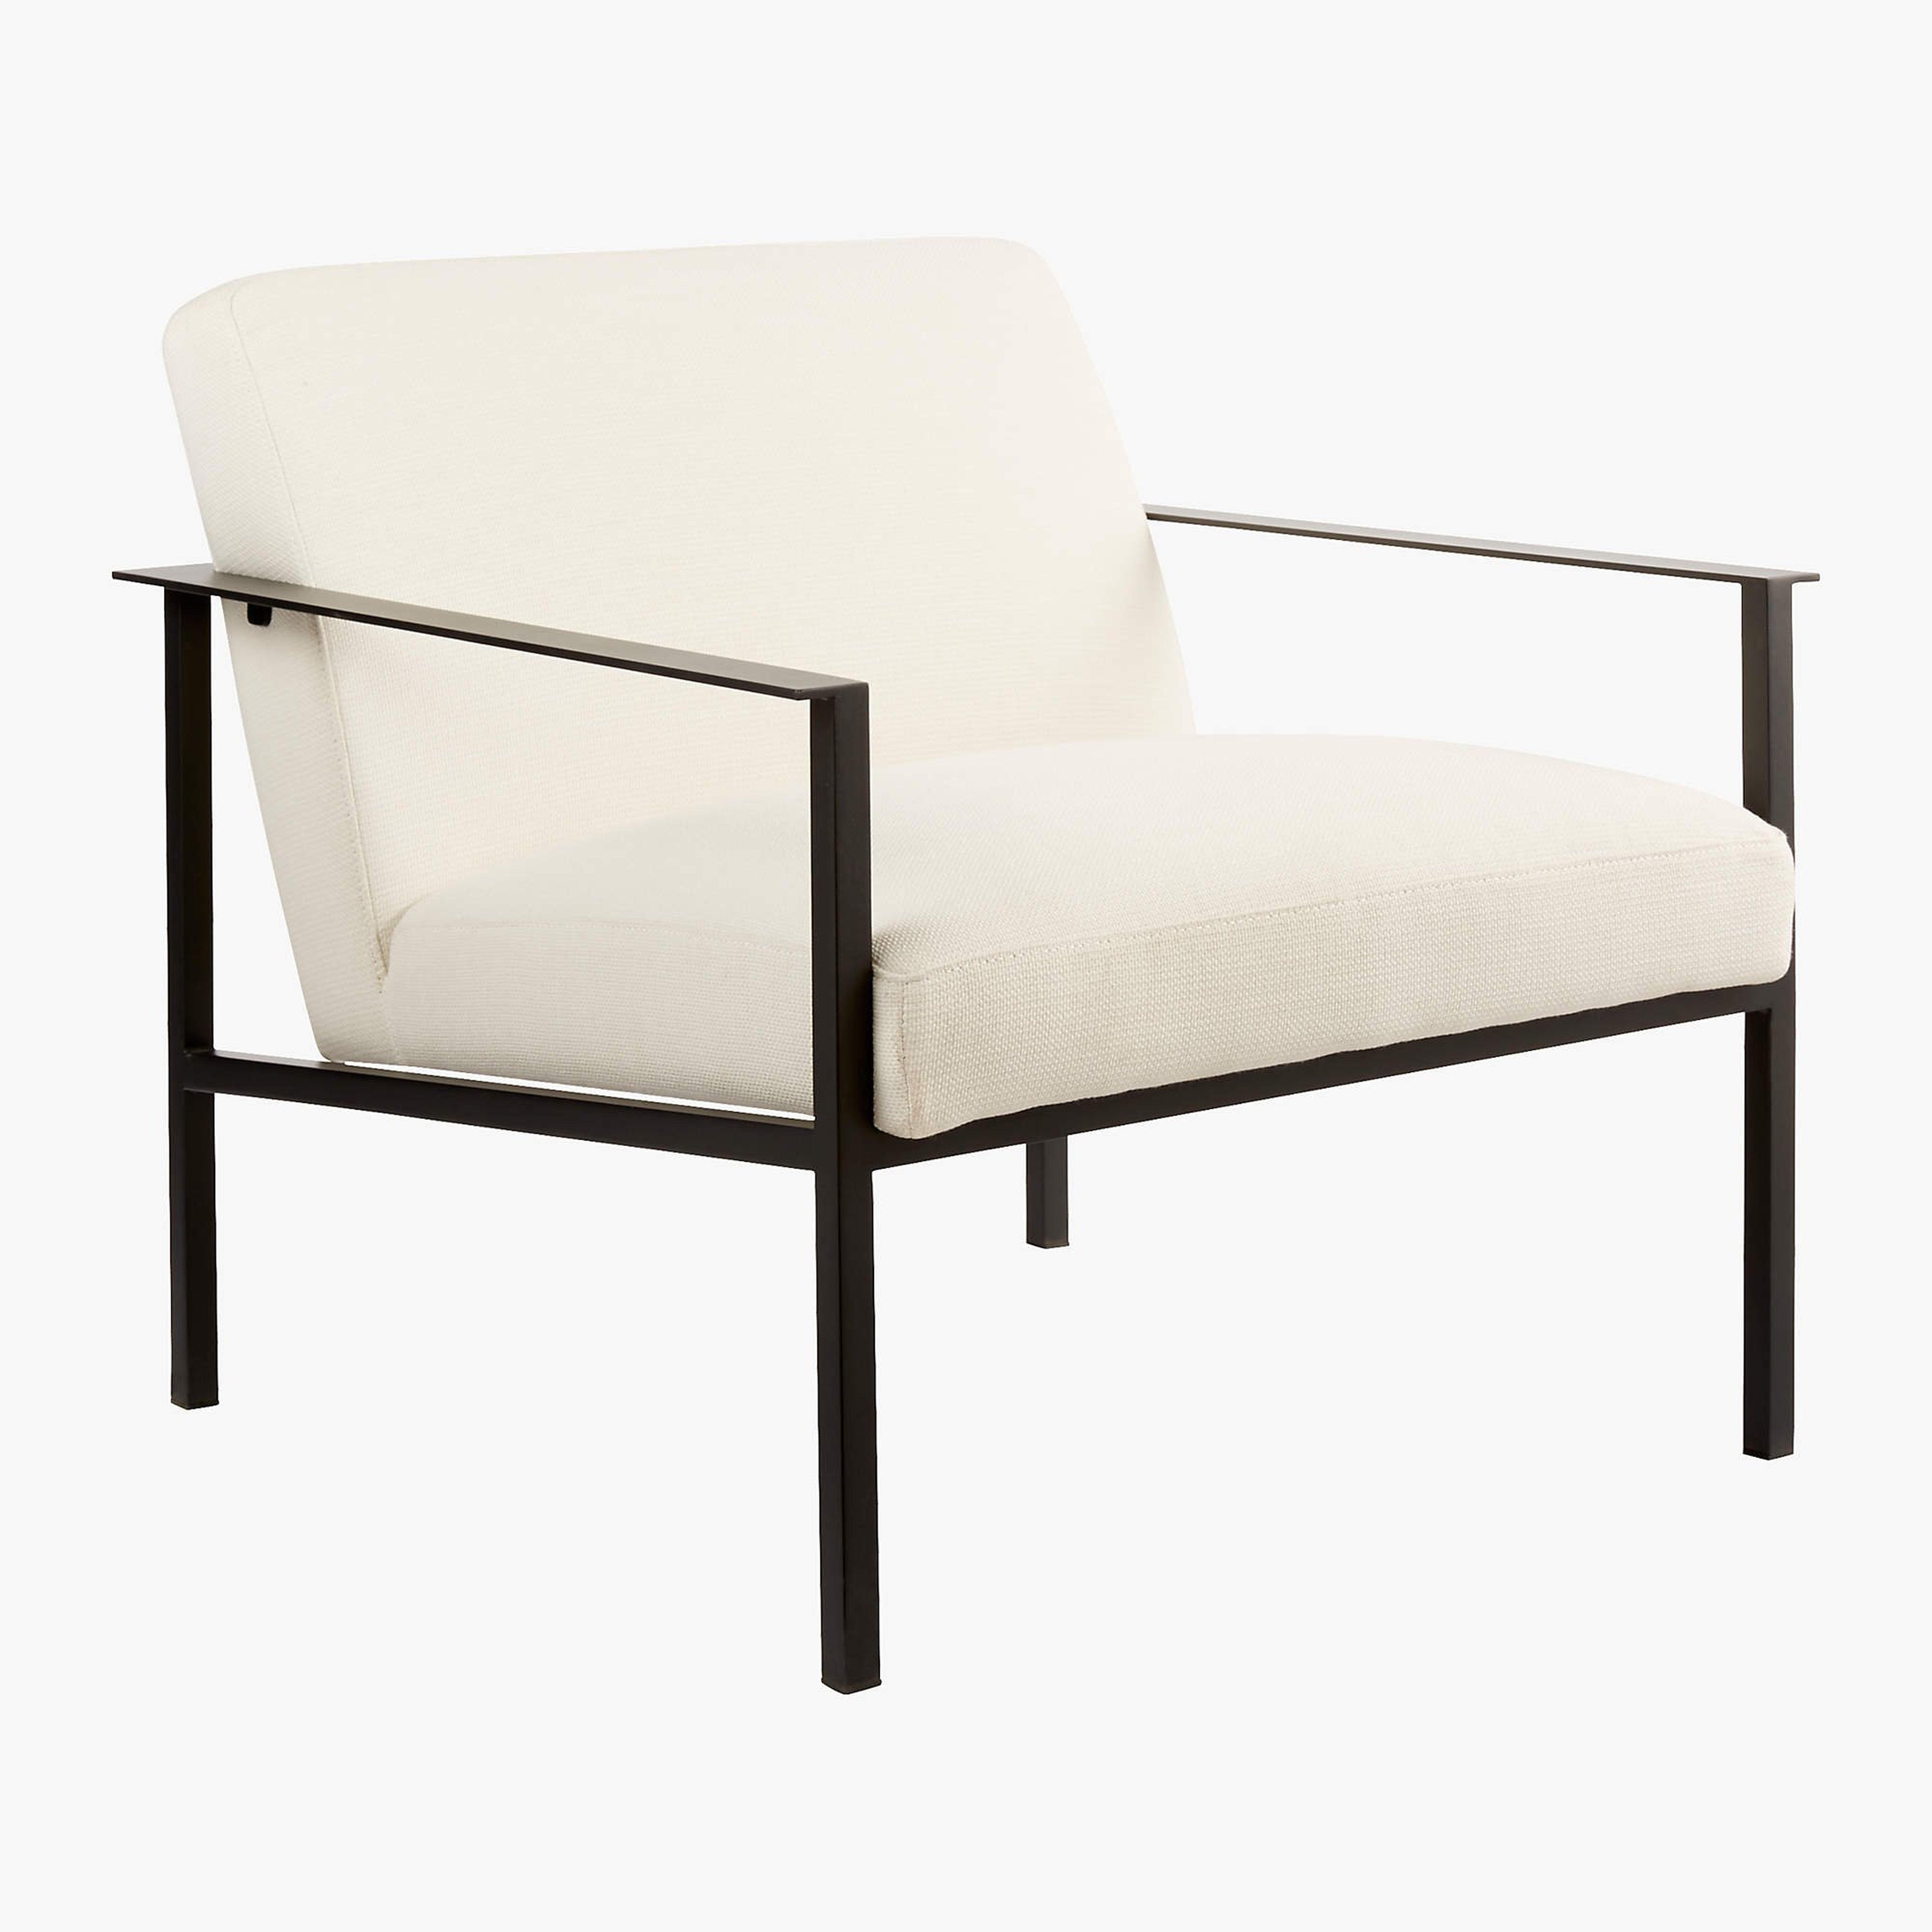 Cue White Chair with Black Legs - CB2